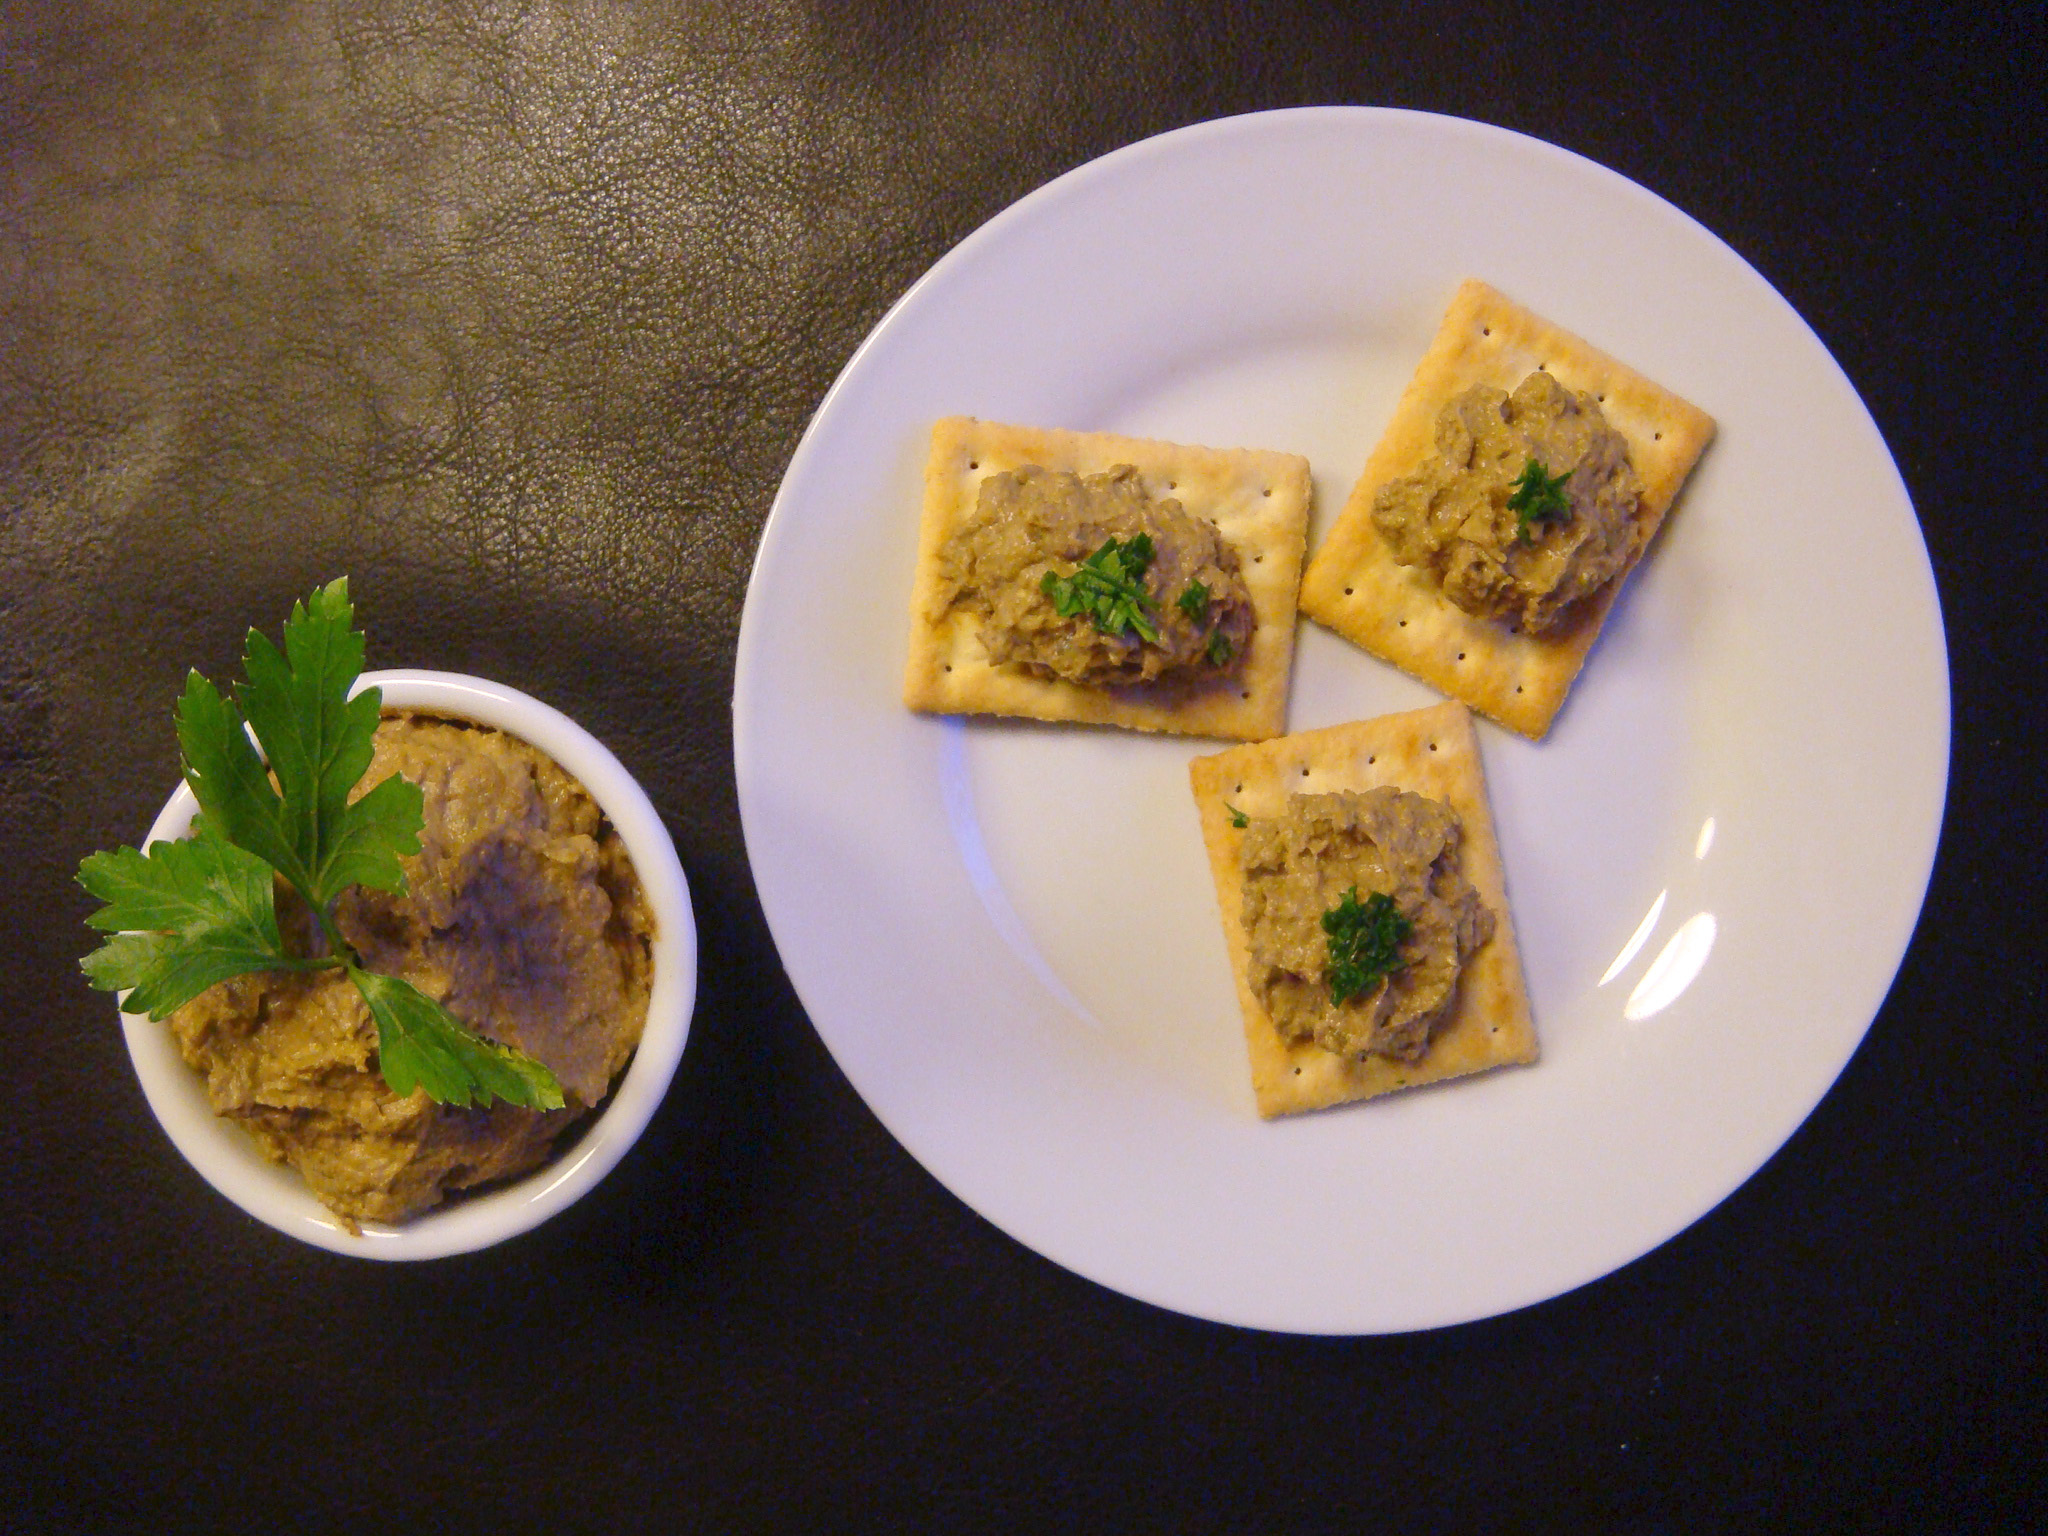 Beef liver pâté with crackers and a hint of parsley